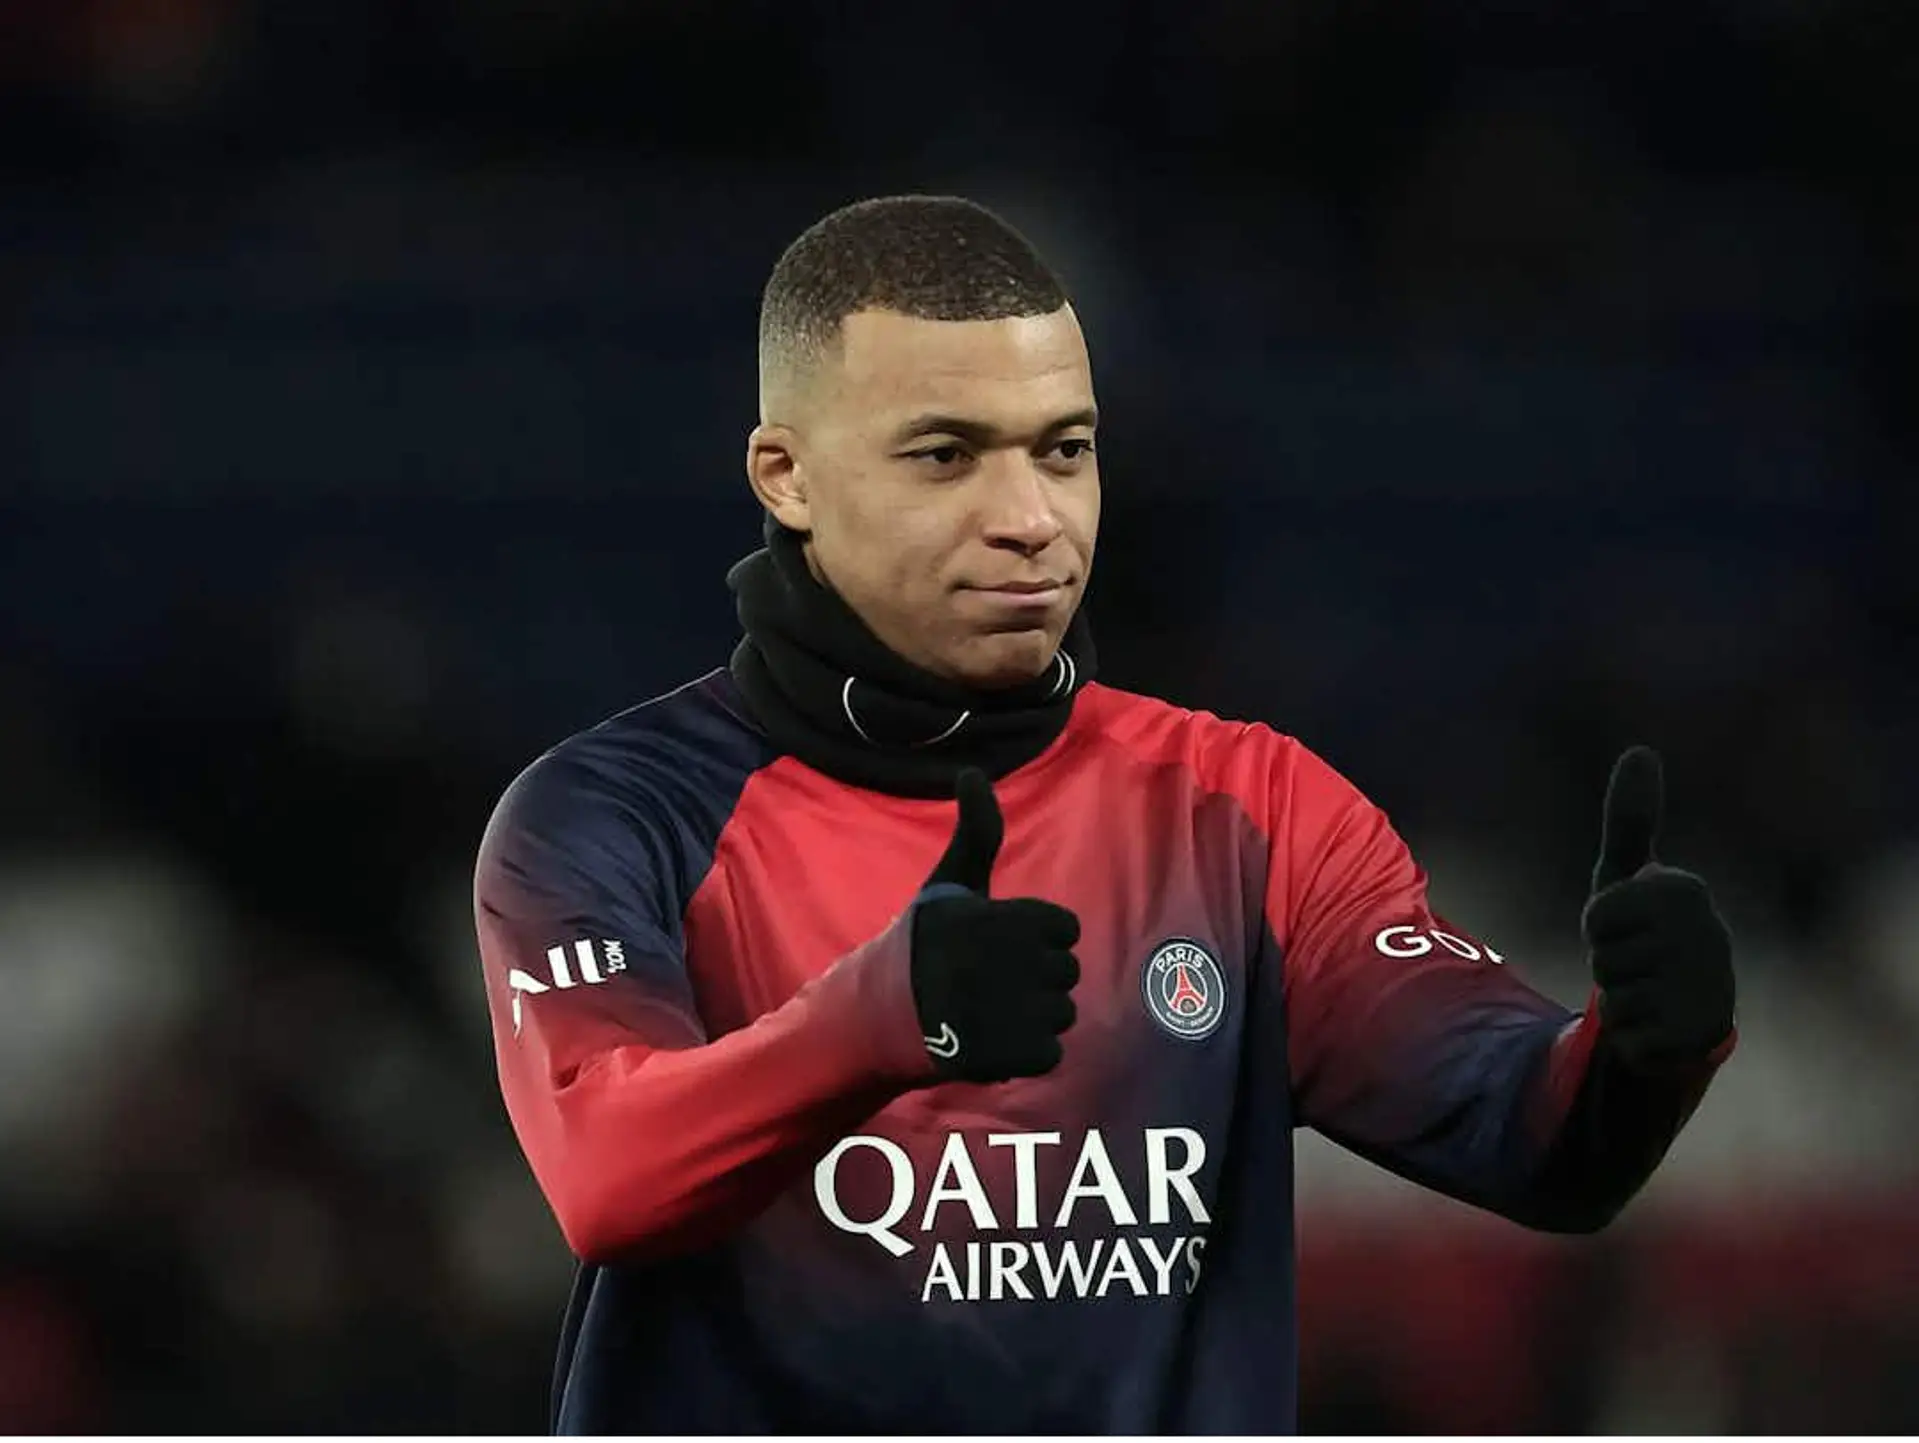 Kylian mbappe reaches verbal agreement to join Real Madrid